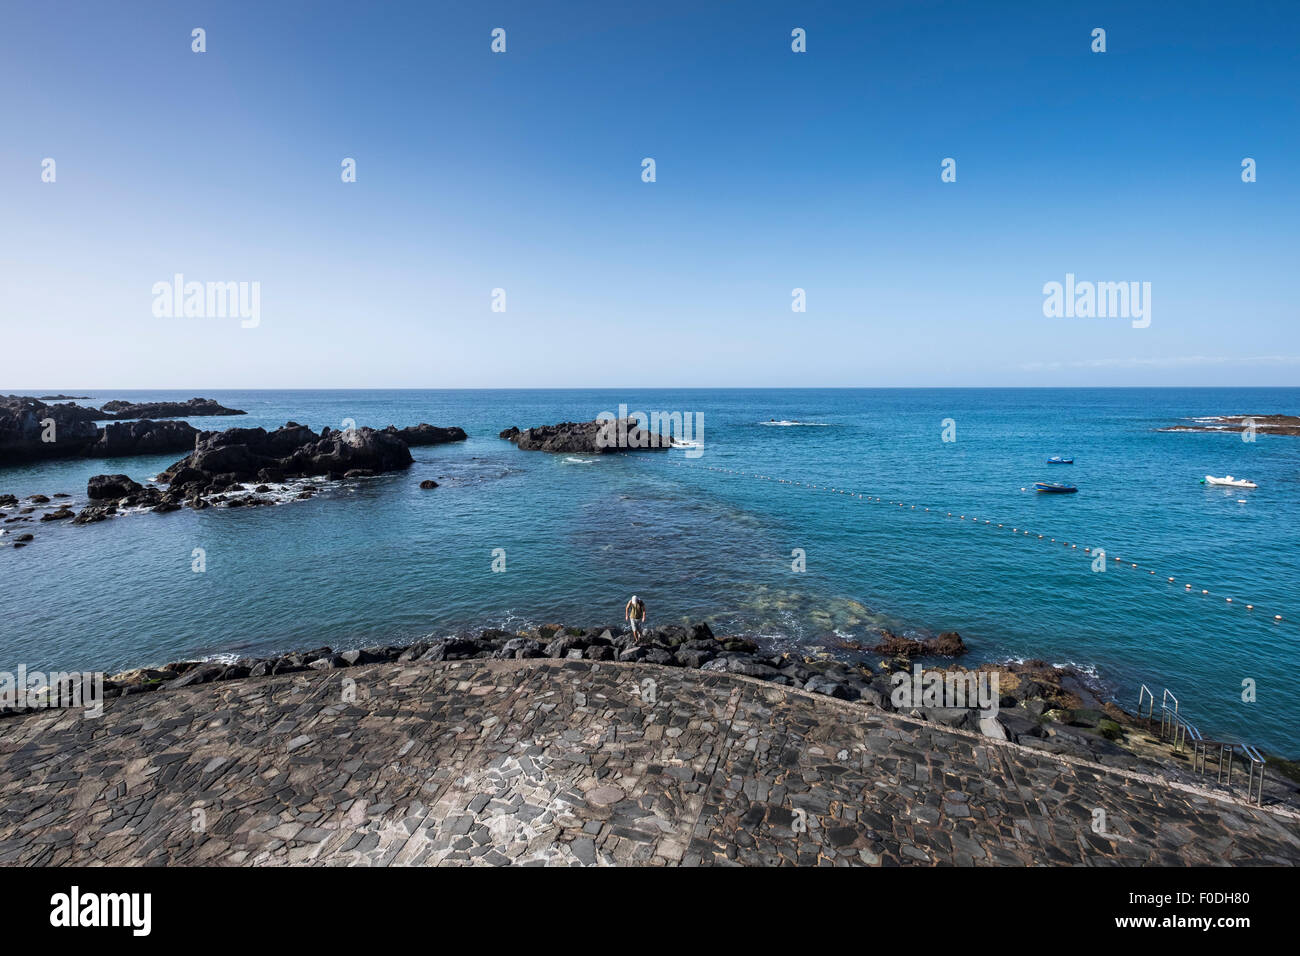 Rocks and crazy paving walkway at Alcala seafront in Guia de Isora, Tenerife, Canary Islands, Spain. Stock Photo